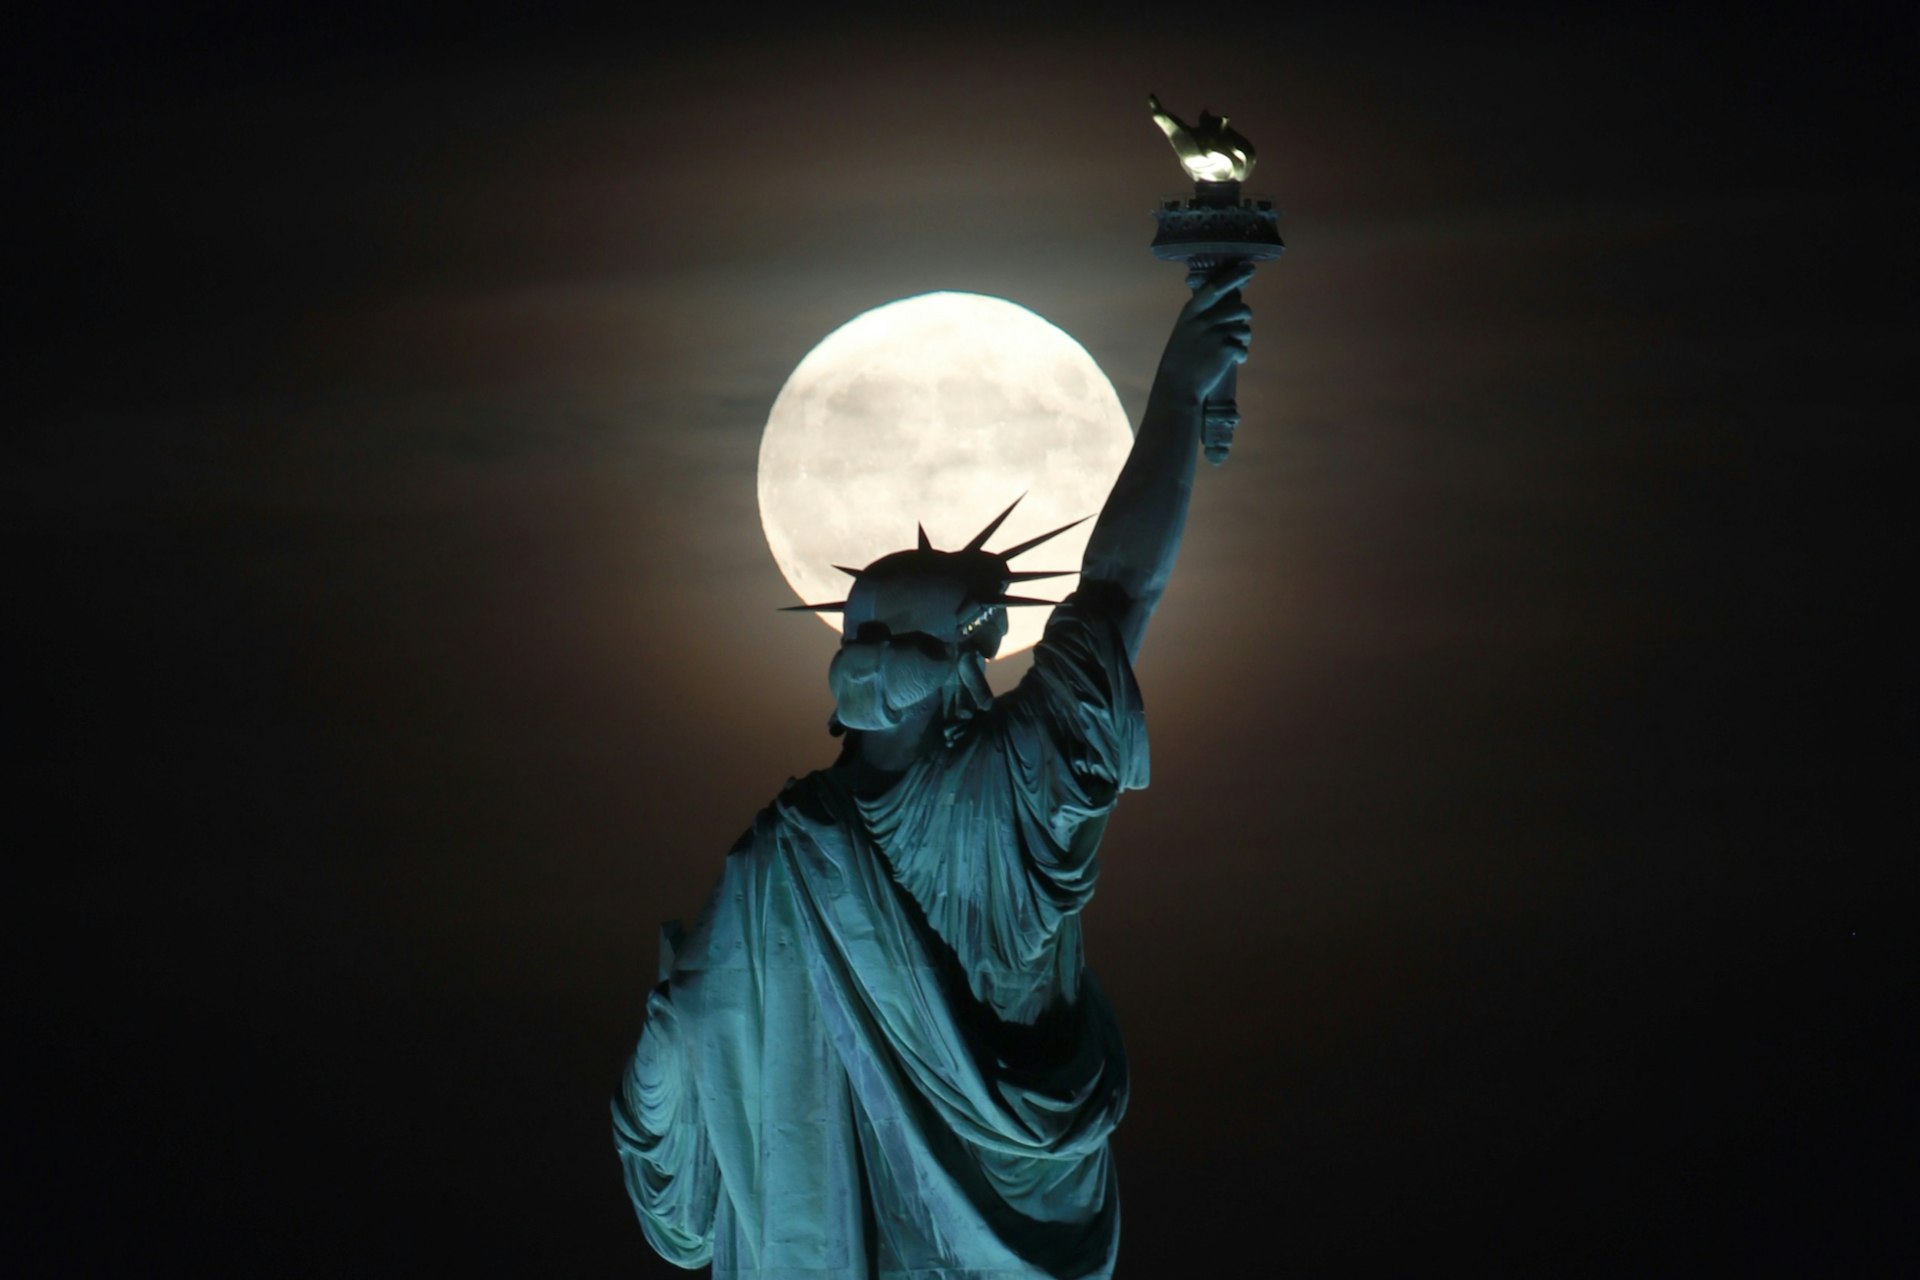 The Statue of Liberty in front of a full moon